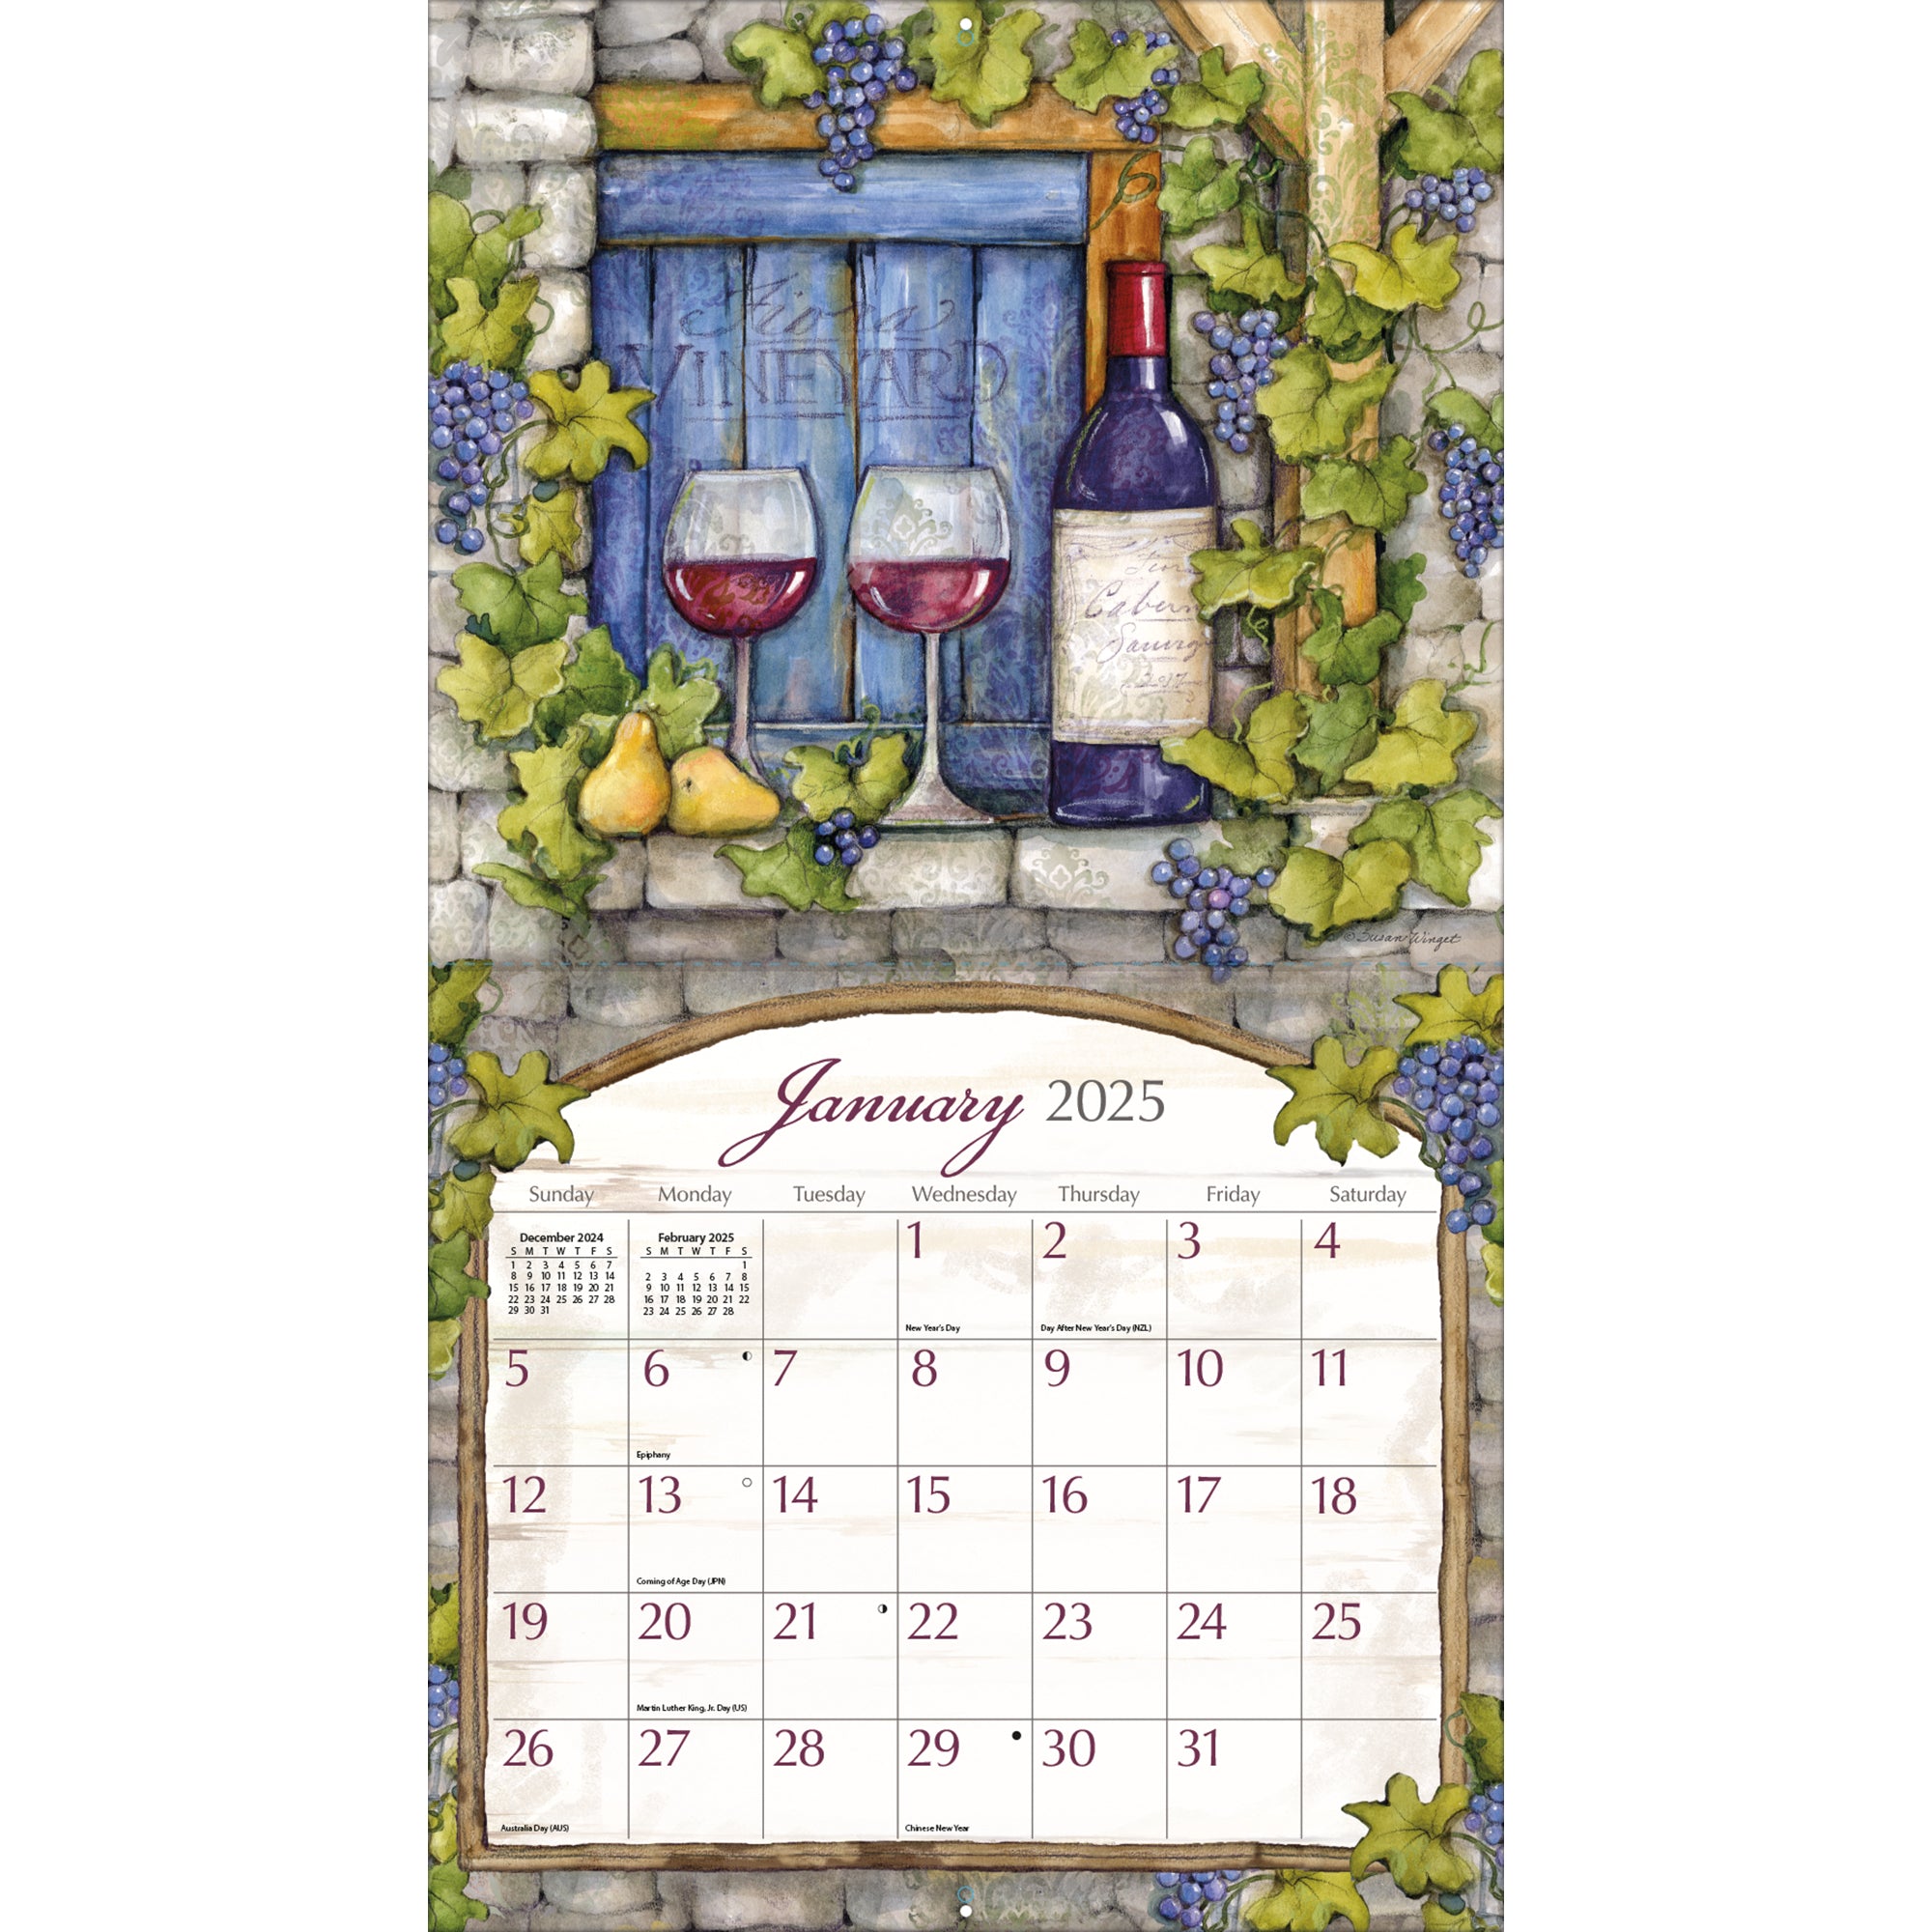 2025 Wine Country By Susan Winget - LANG Deluxe Wall Calendar